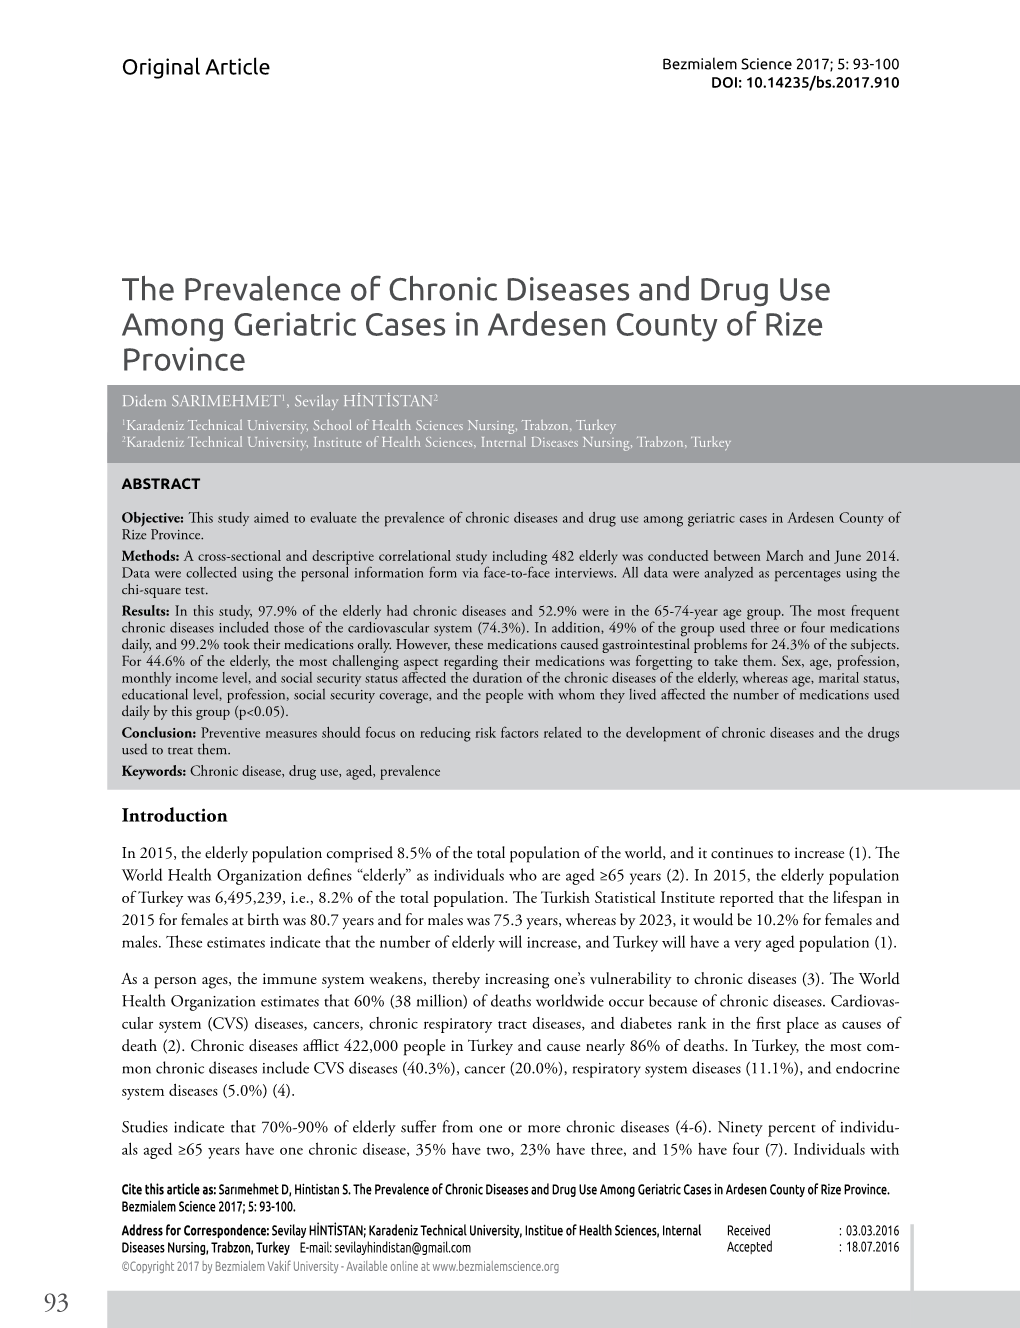 The Prevalence of Chronic Diseases and Drug Use Among Geriatric Cases in Ardesen County of Rize Province